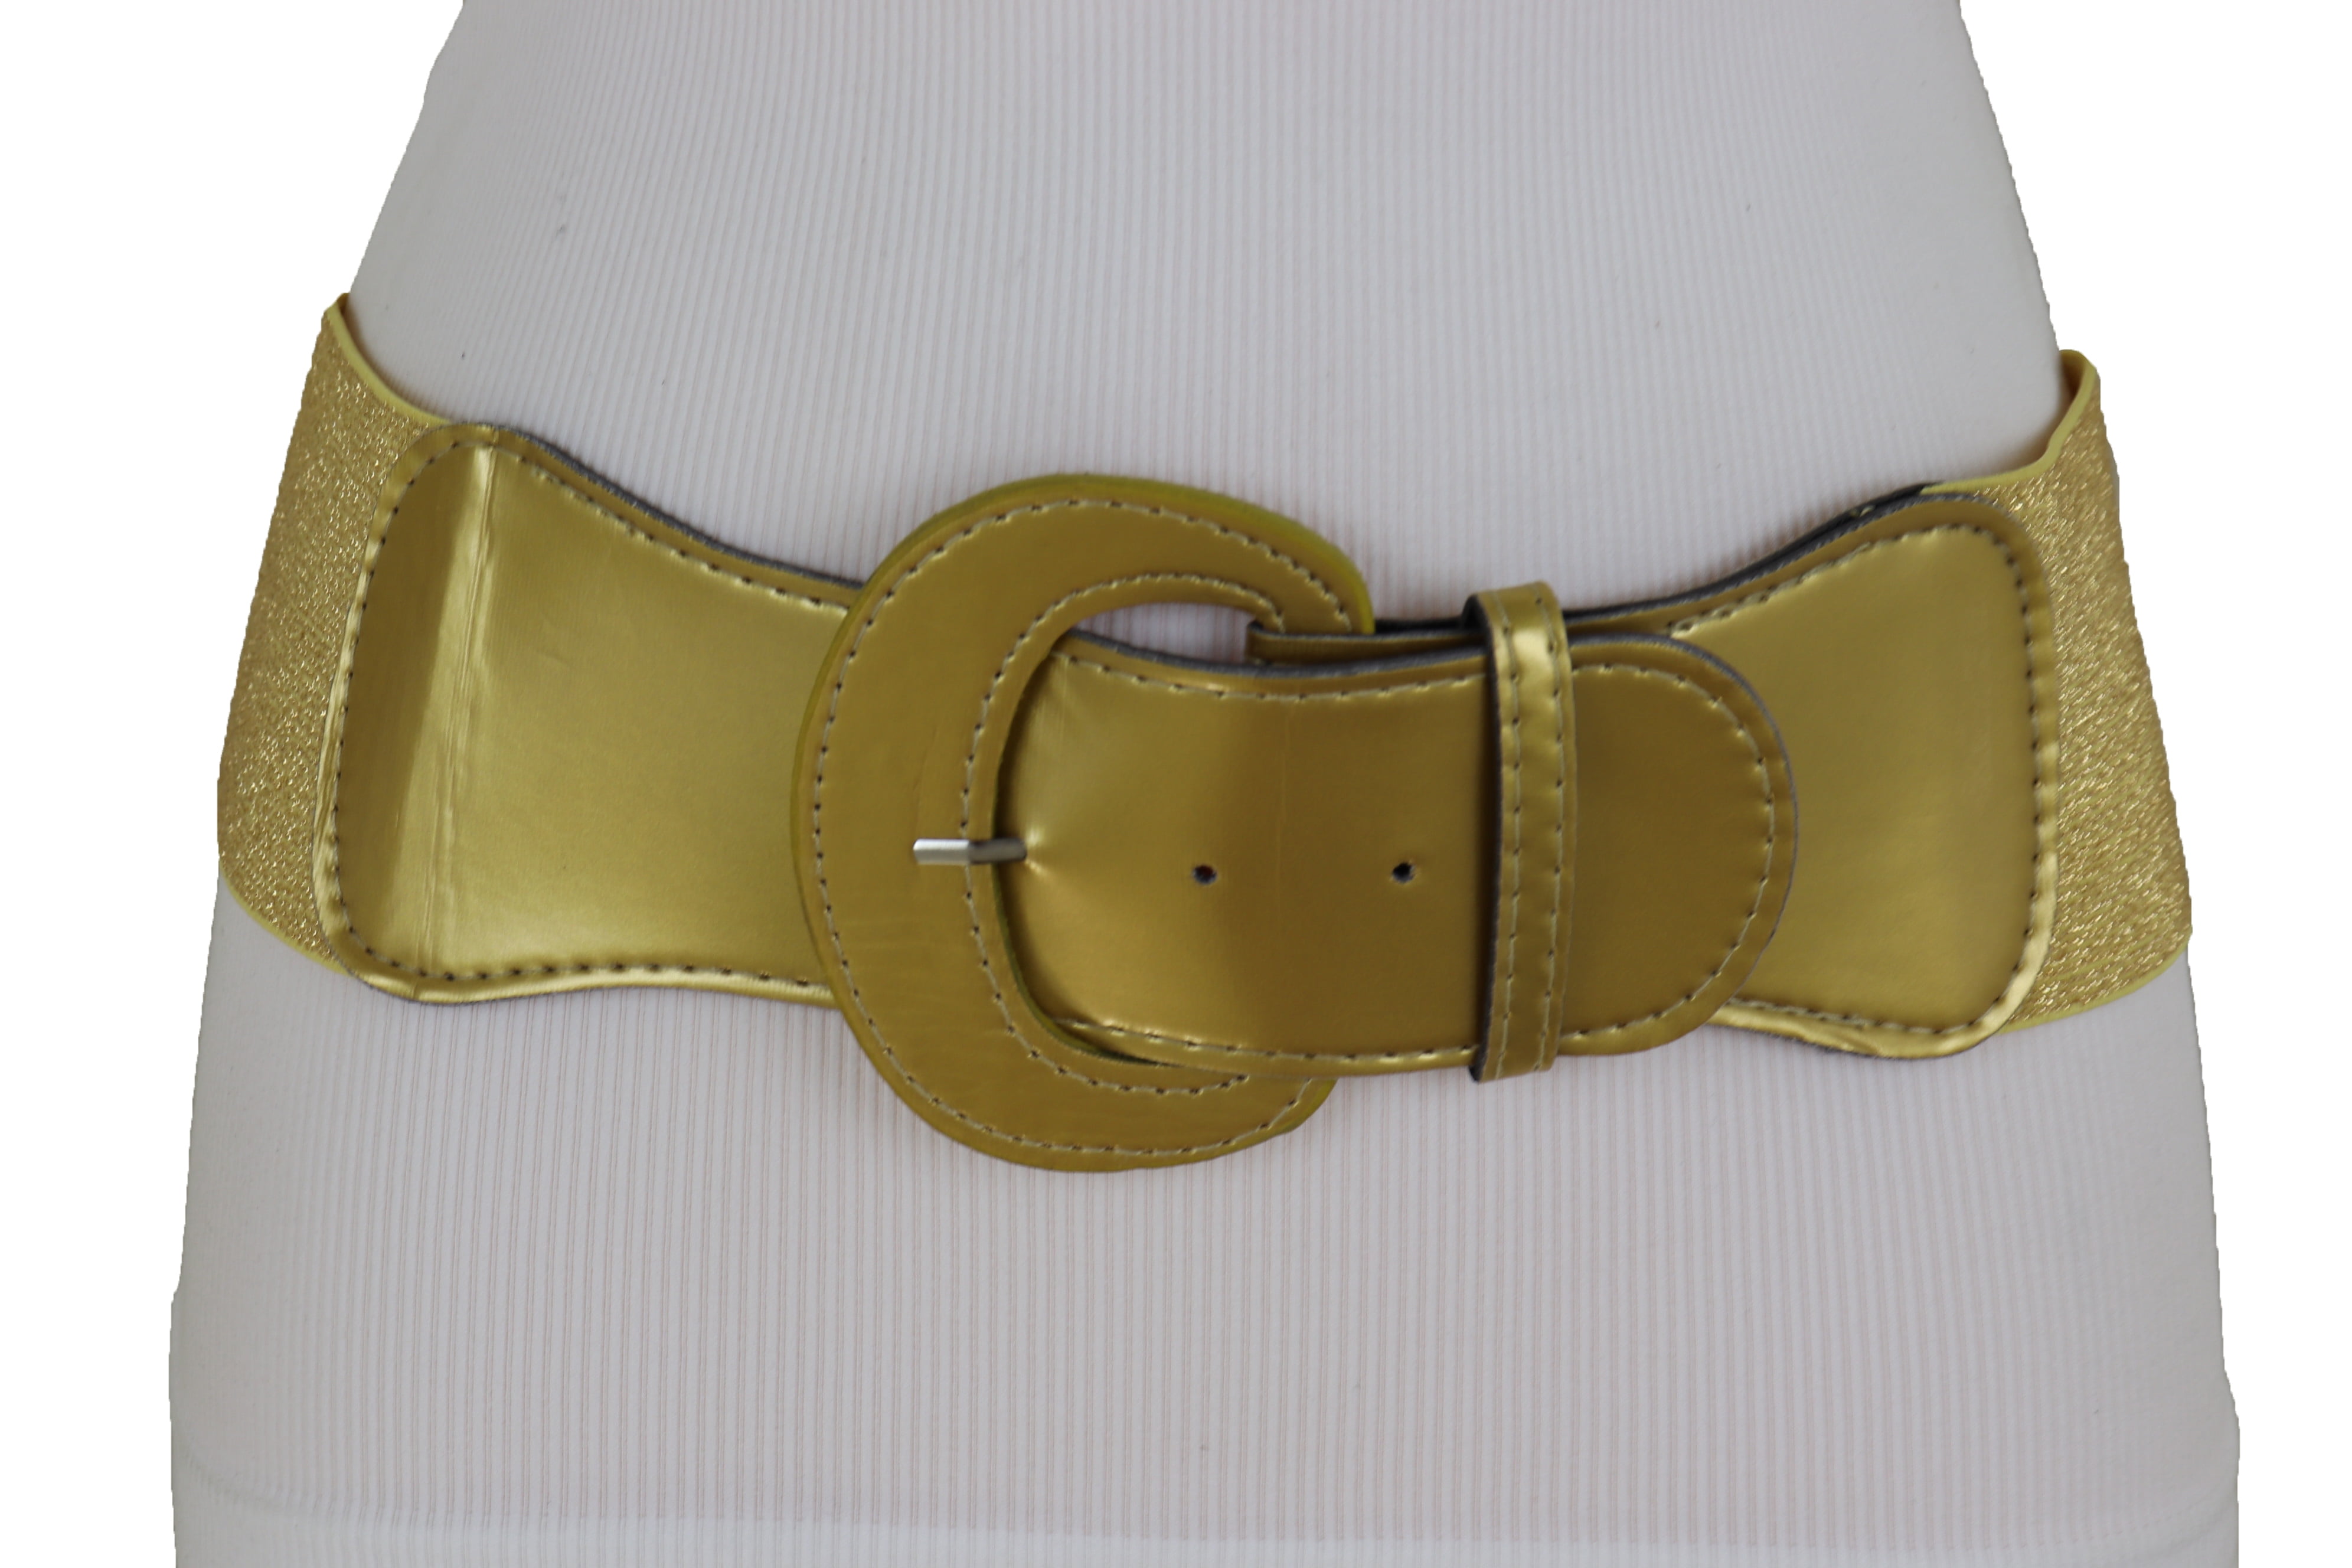 Women Fashion Girly Brown Faux Leather Color Belt Hip High Waist Buckle Size M L 